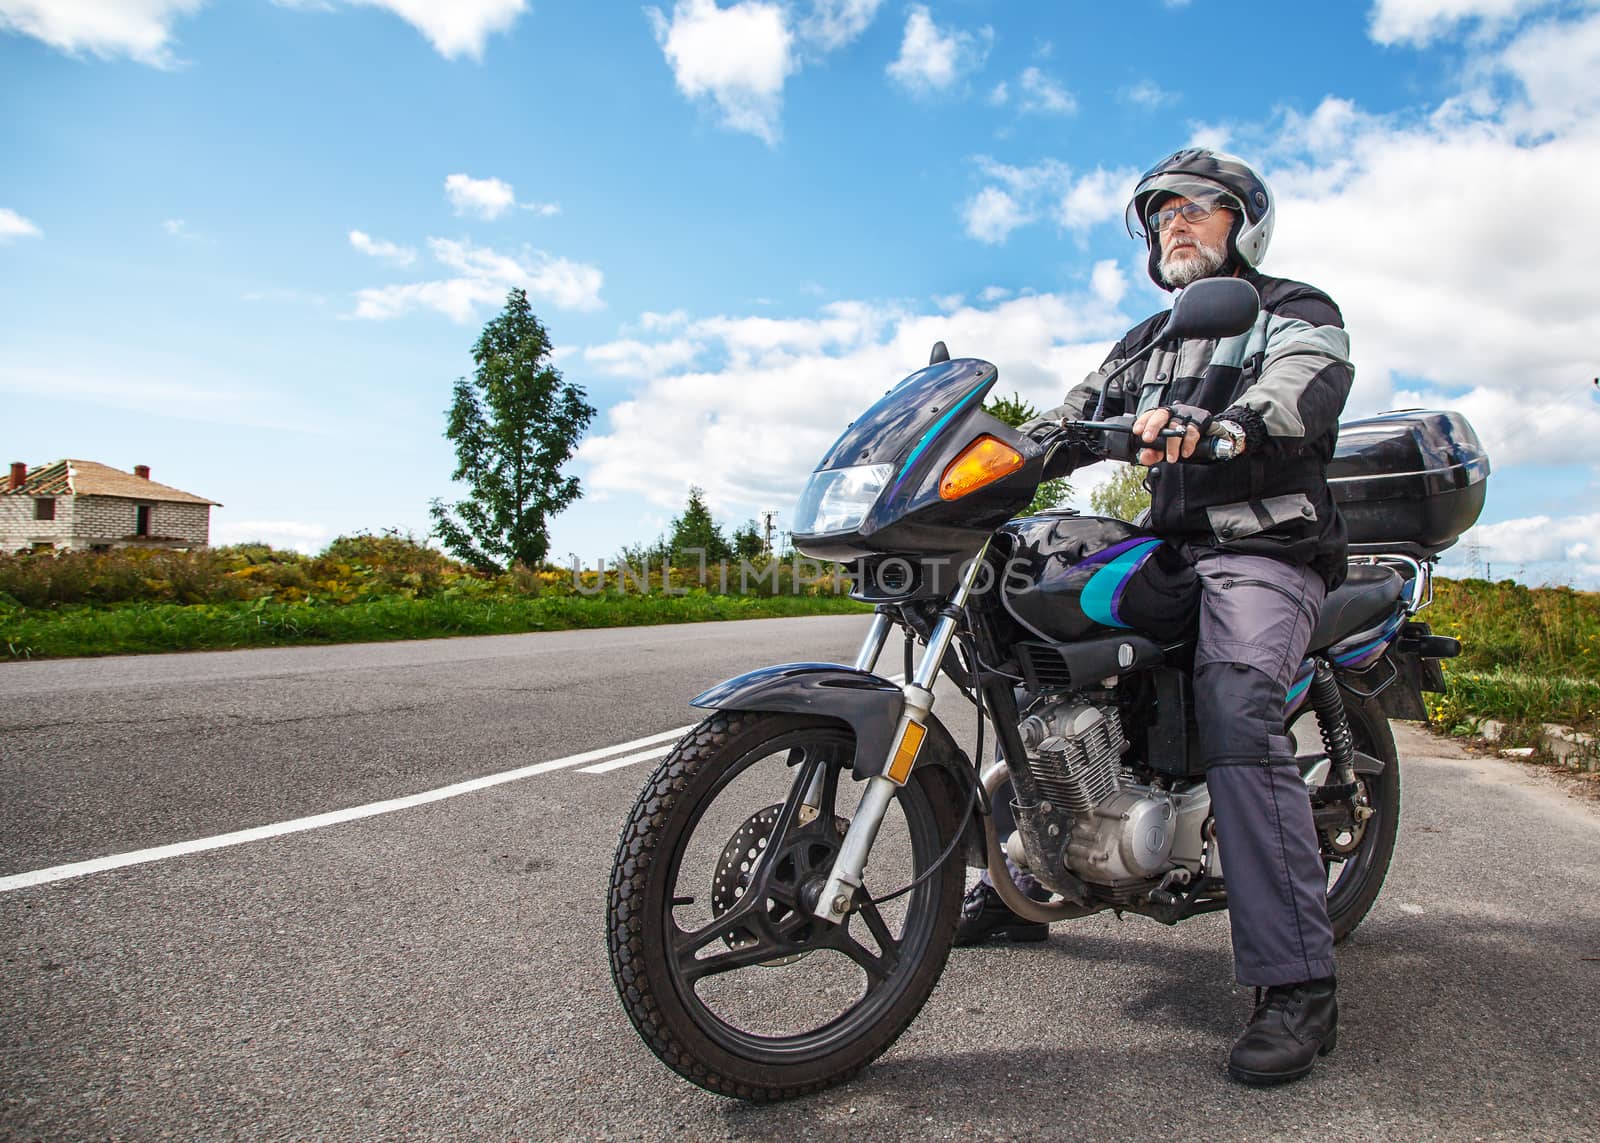 elderly motorcyclist wearing a jacket and glasses with a helmet by raddnatt